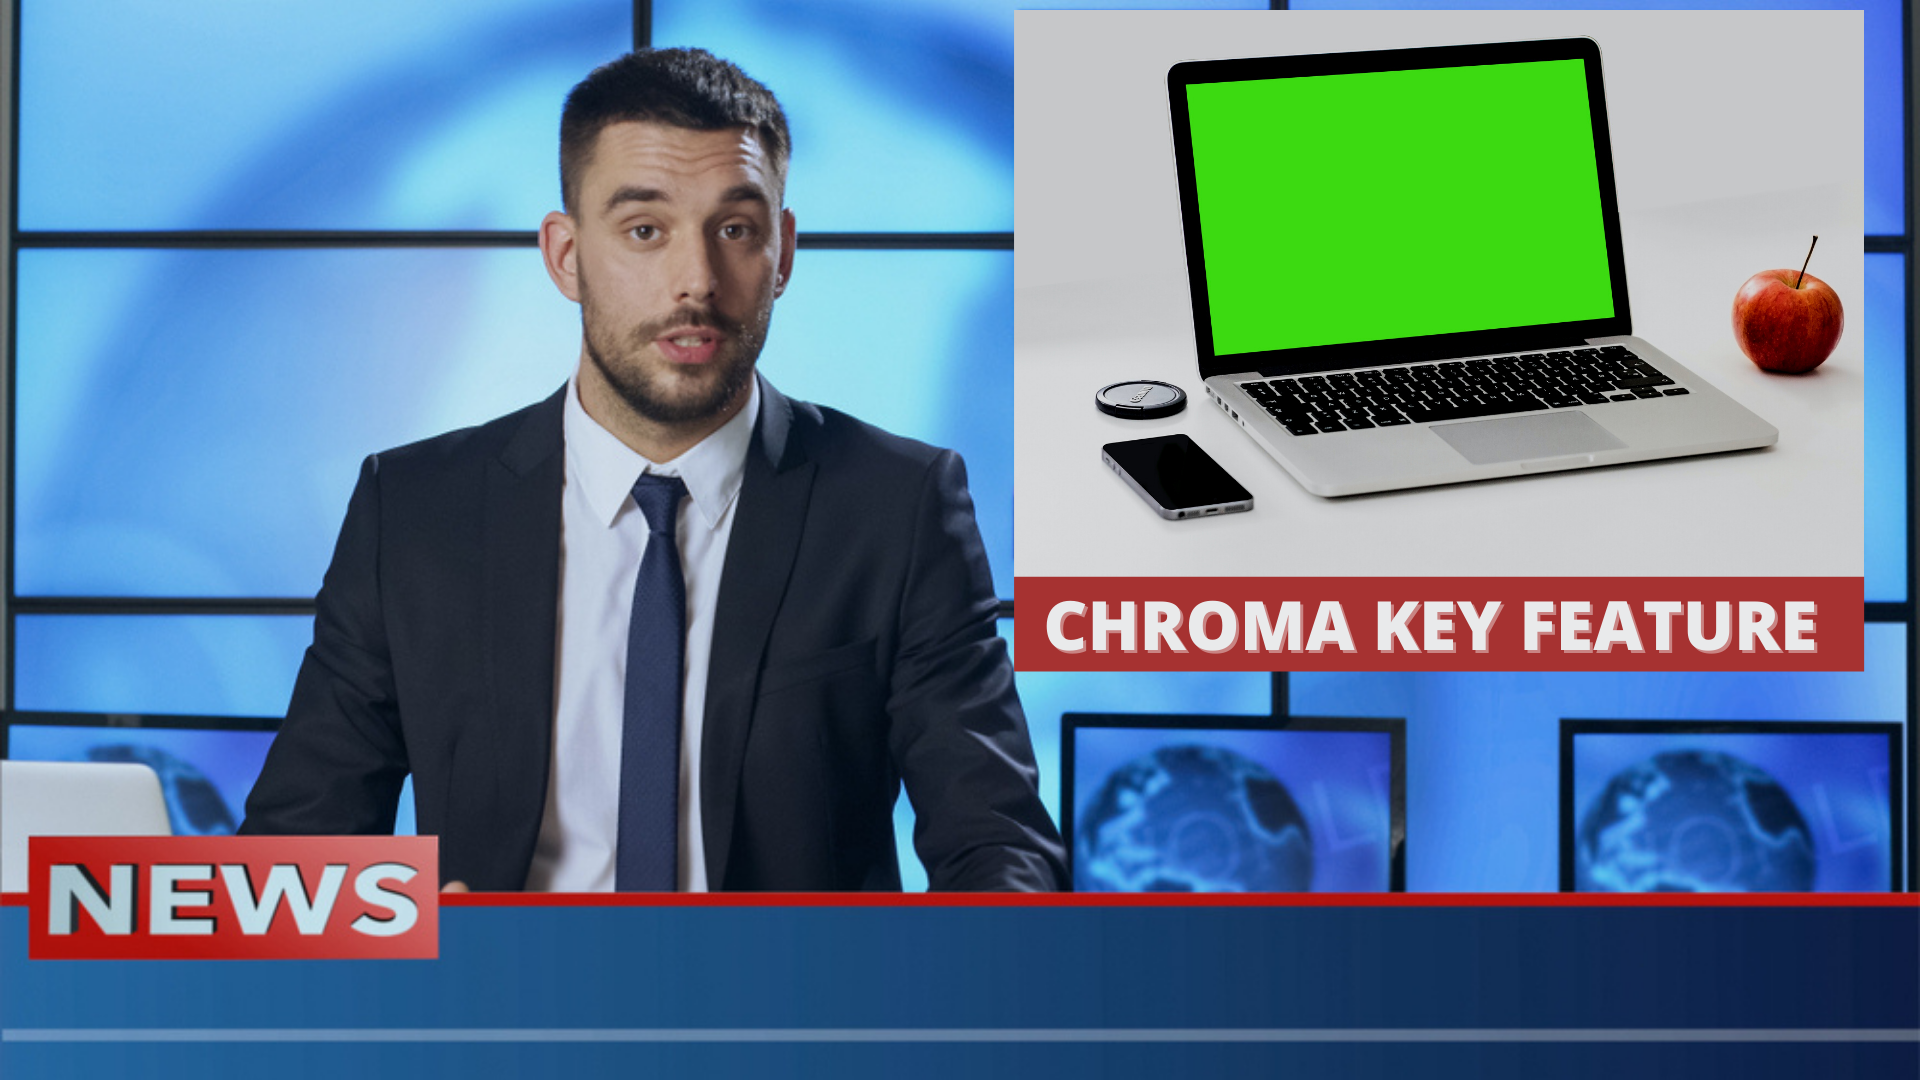 What is Chroma Key?